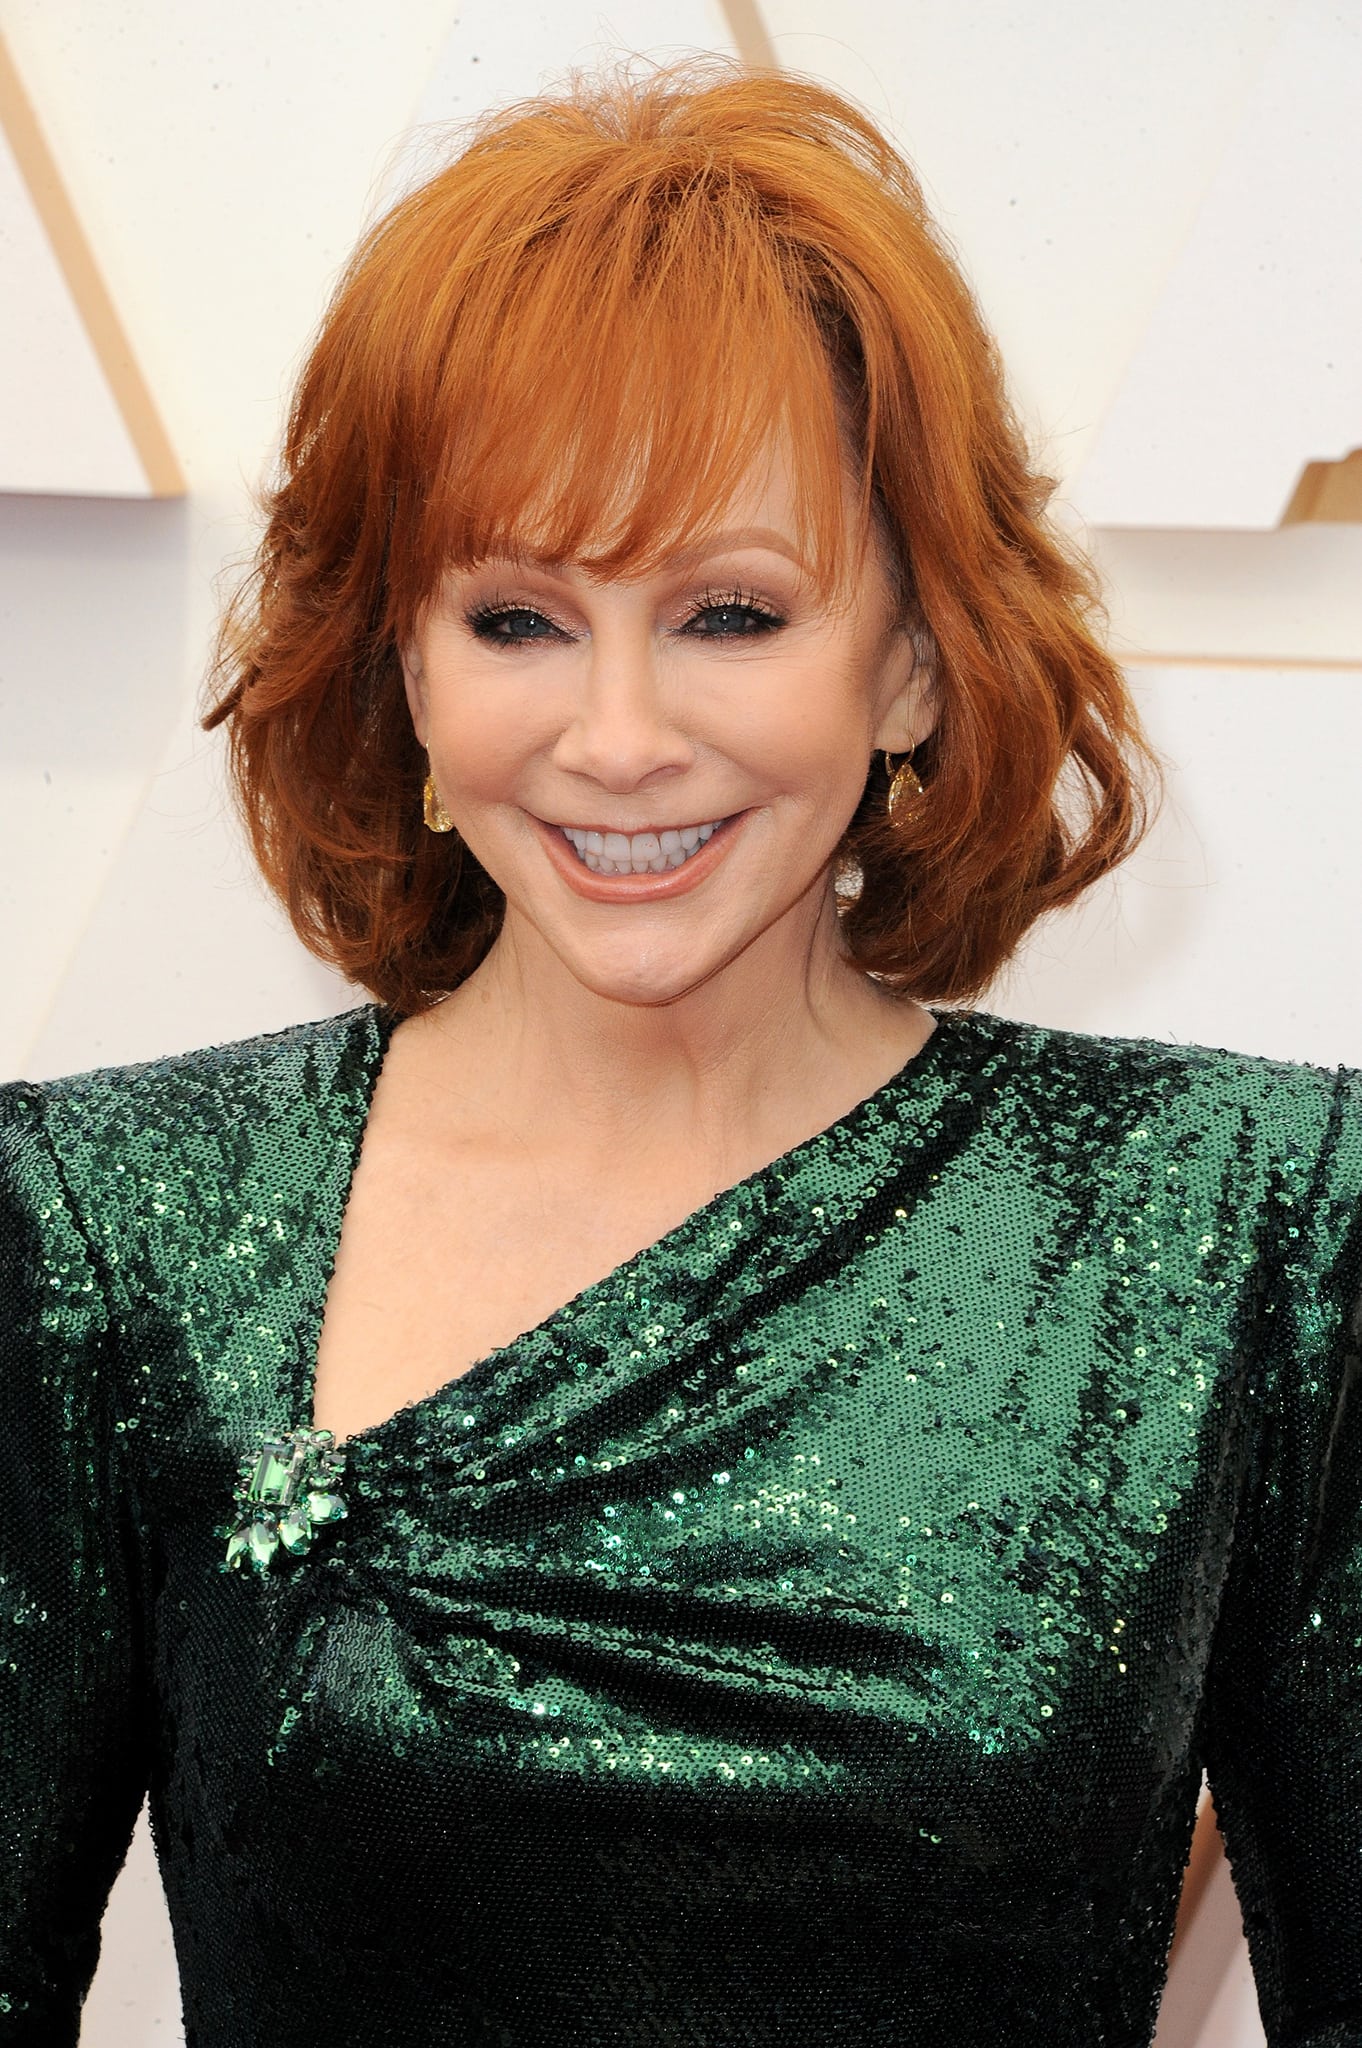 The Queen of Country Reba McEntire has sold more than 75 million records worldwide and has placed over 100 singles on the Billboard Hot Country Songs chart